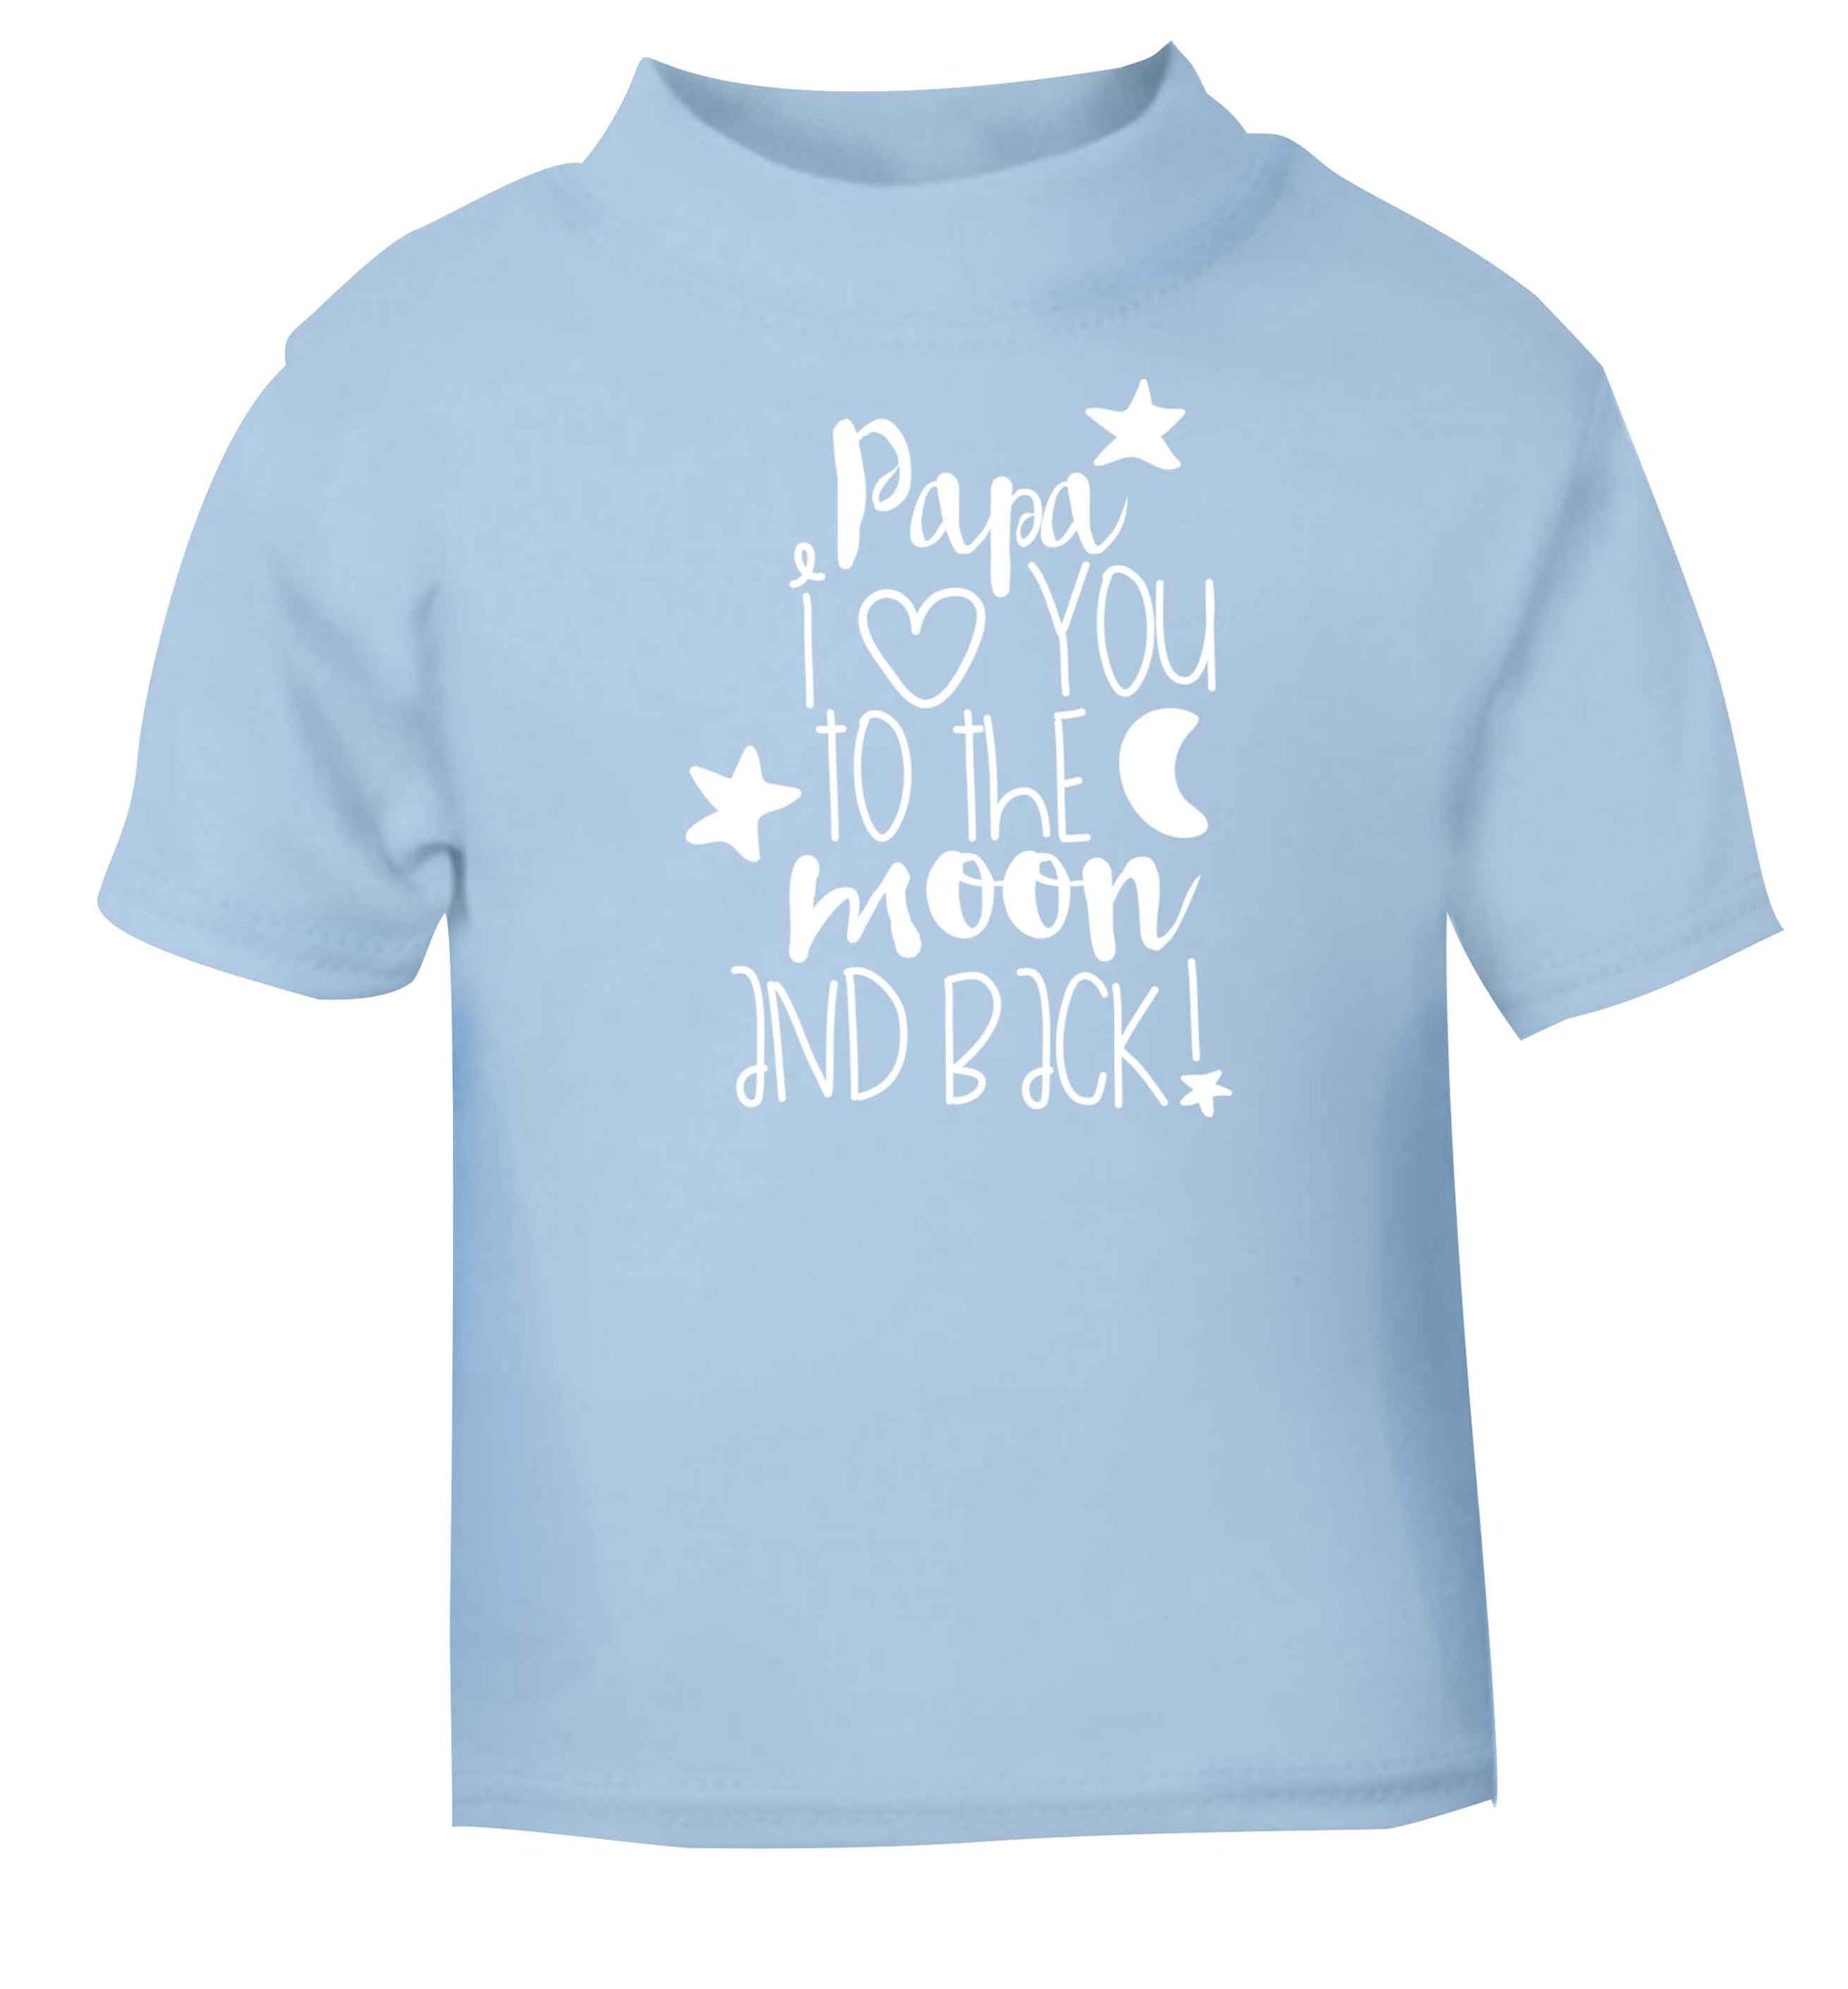 Papa I love you to the moon and back light blue baby toddler Tshirt 2 Years